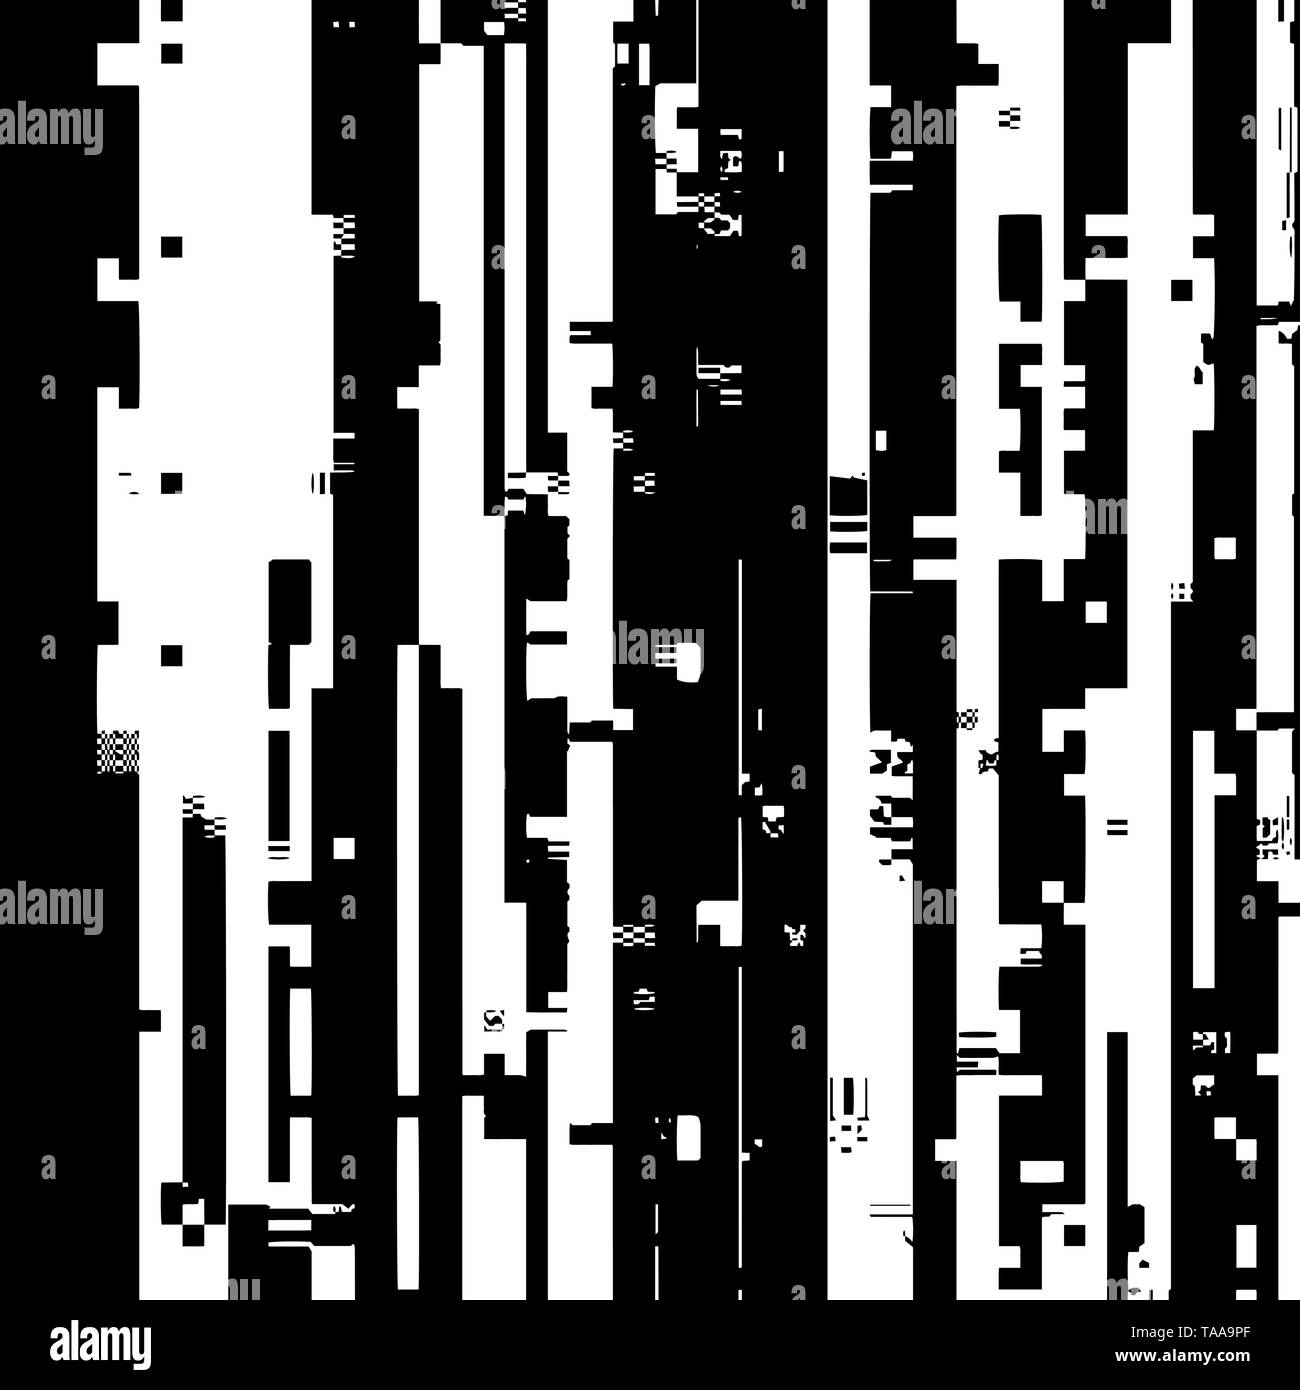 Glitch overlay distress texture. Cyber hacker attack theme creative design template. Grunge glitched black and white background. EPS10 vector. Stock Vector